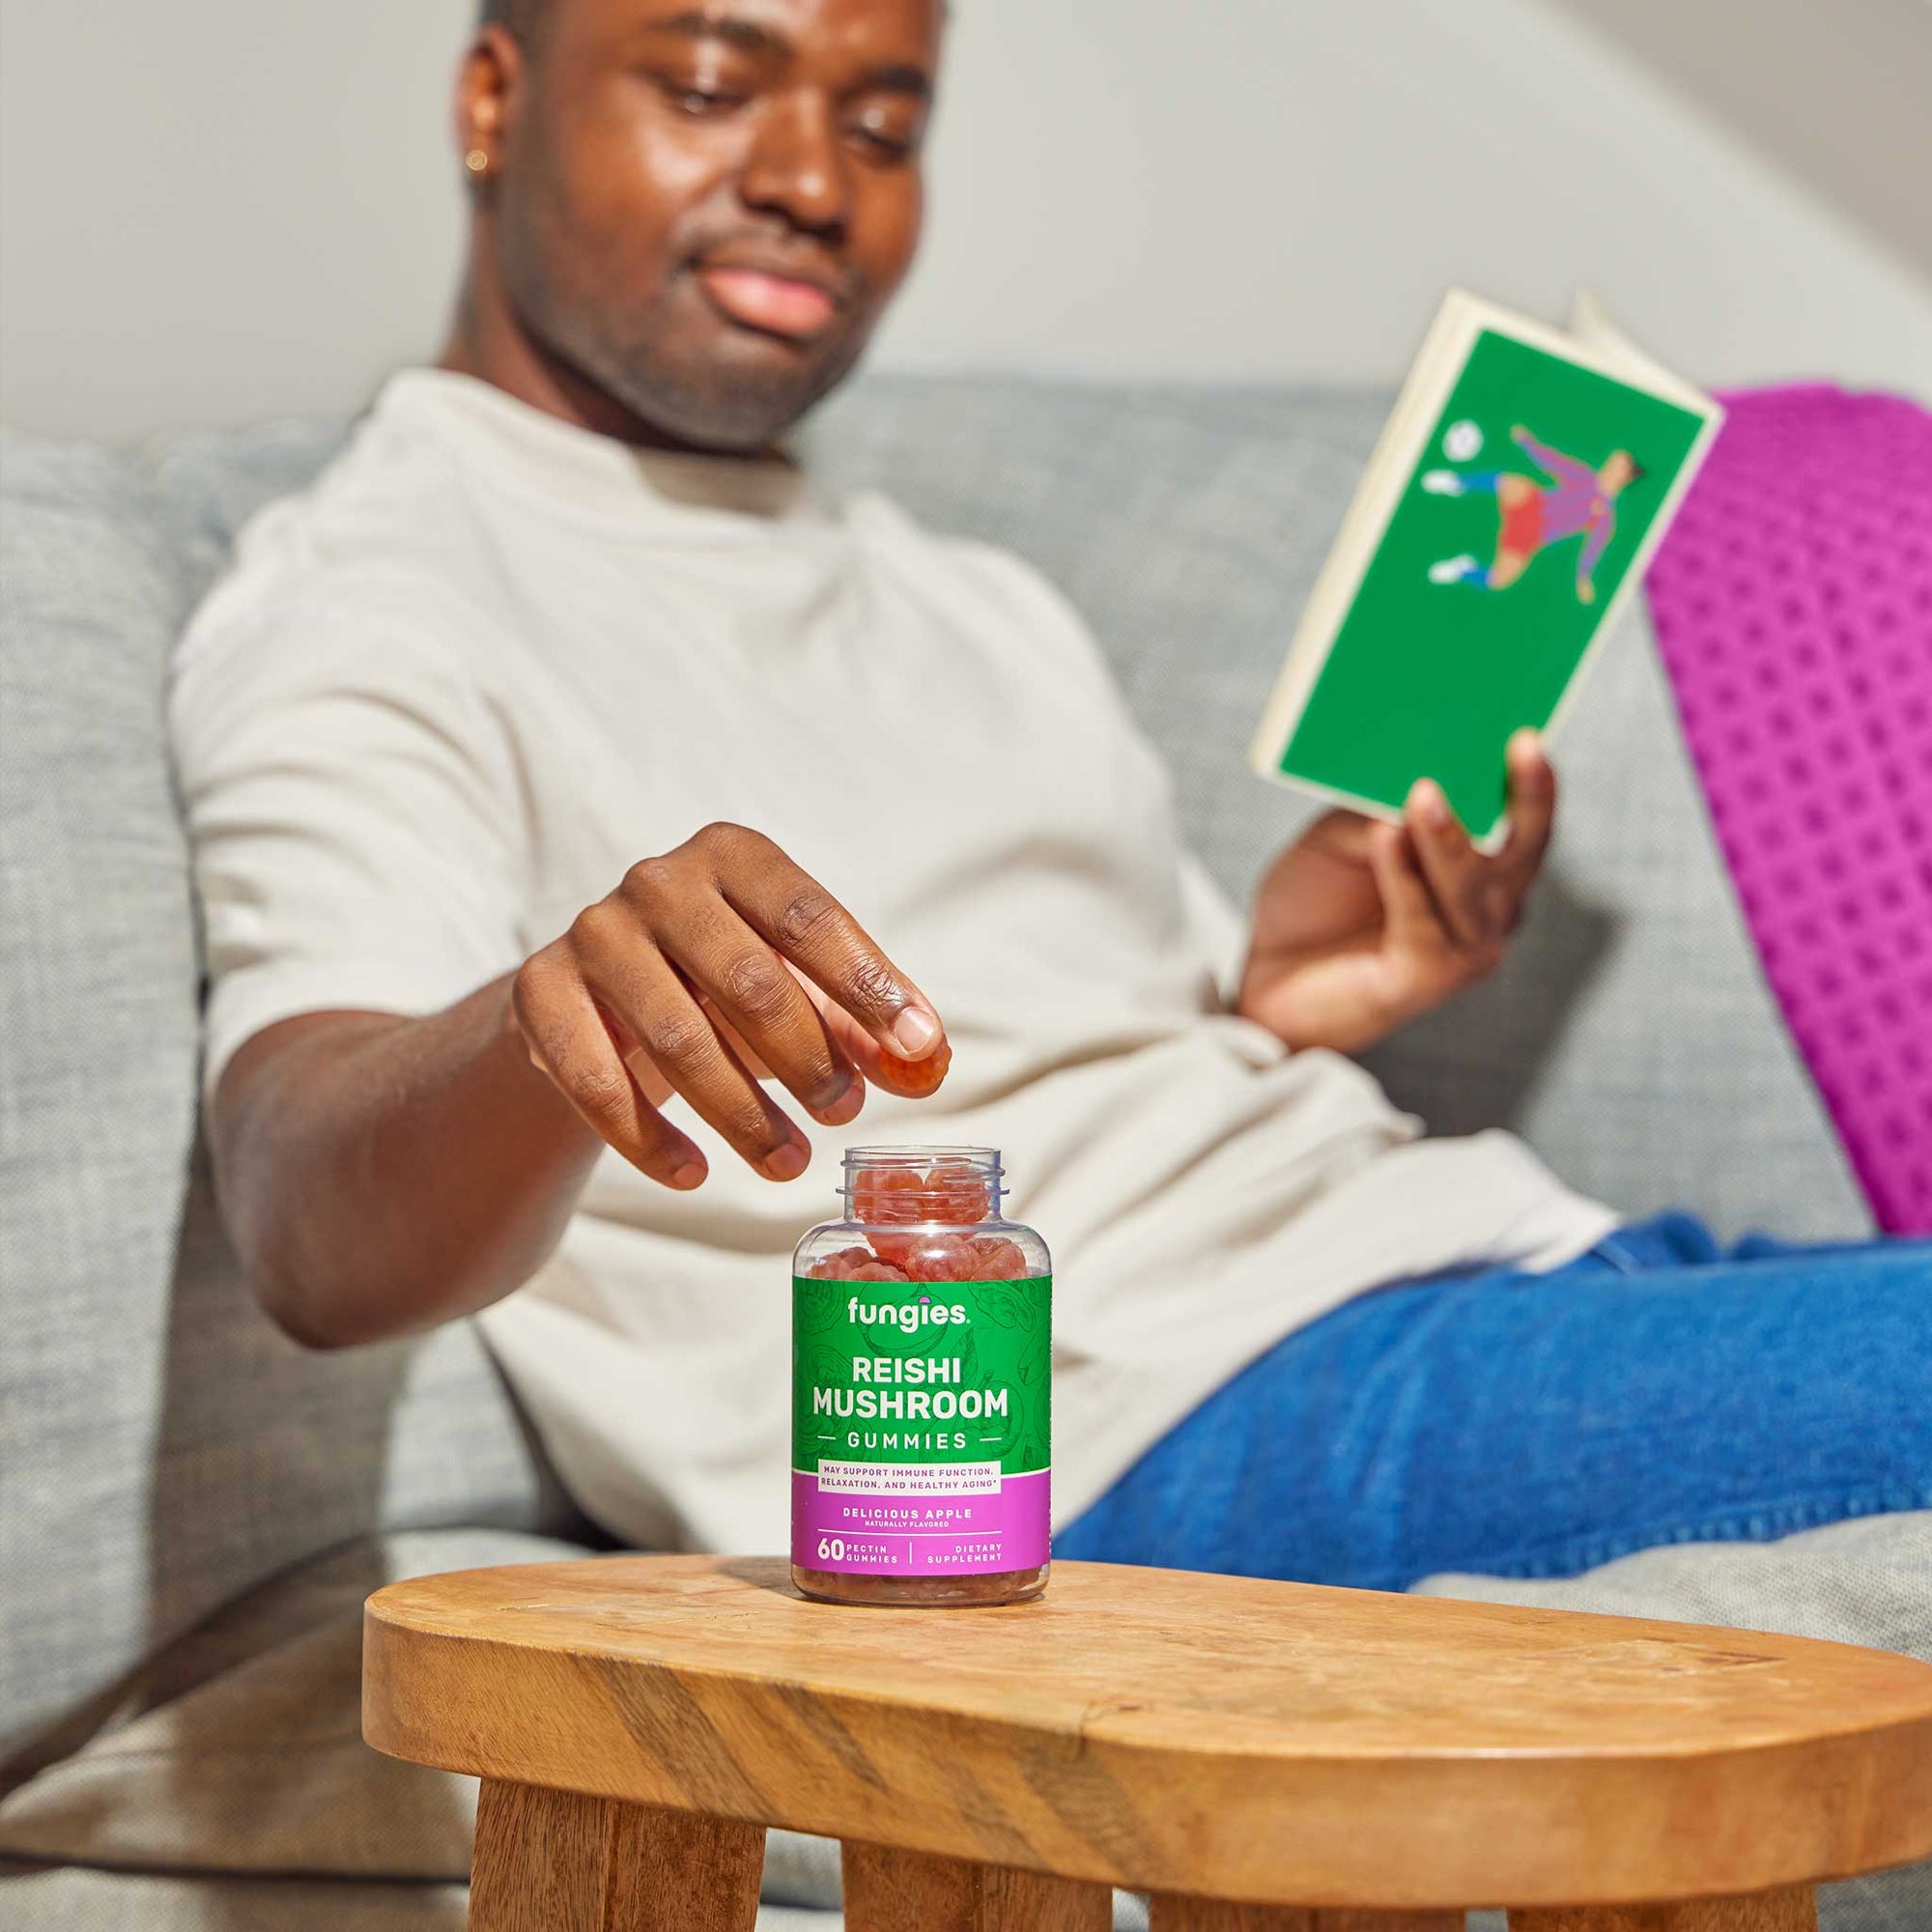 Man eating Reishi Mushroom Gummies while reading a book and chilling out.